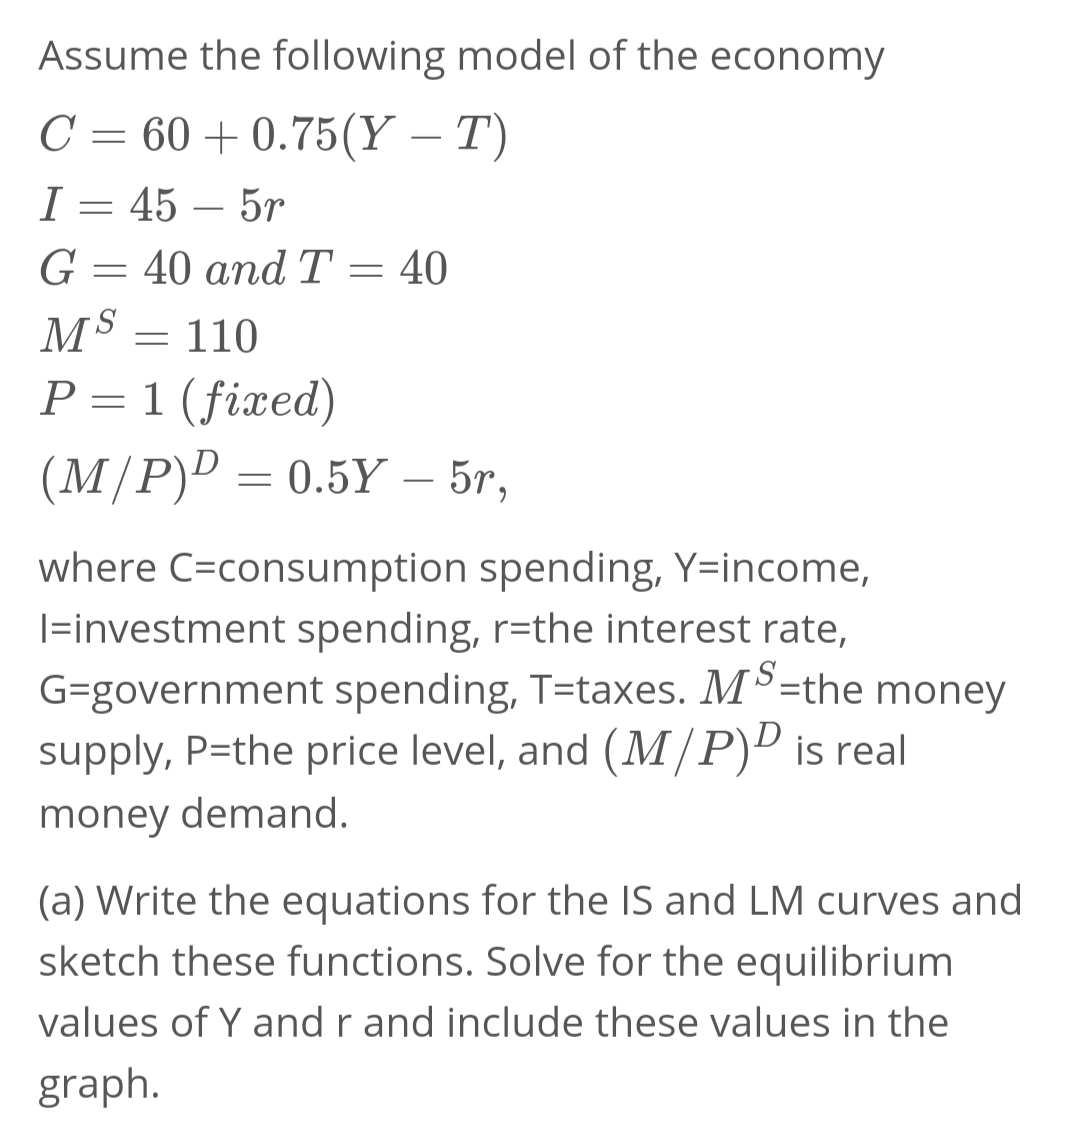 Assume the following model of the economy
C = 60 +0.75(Y – T)
I = 45 – 5r
G = 40 and T = 40
MS
110
P = 1 (fixed)
(M/P)D = 0.5Y – 5r,
-
where C=consumption spending, Y=income,
|=investment spending, r=the interest rate,
G=government spending, T=taxes. MS=the money
supply, P=the price level, and (M/P)D is real
money demand.
(a) Write the equations for the IS and LM curves and
sketch these functions. Solve for the equilibrium
values of Y and r and include these values in the
graph.
